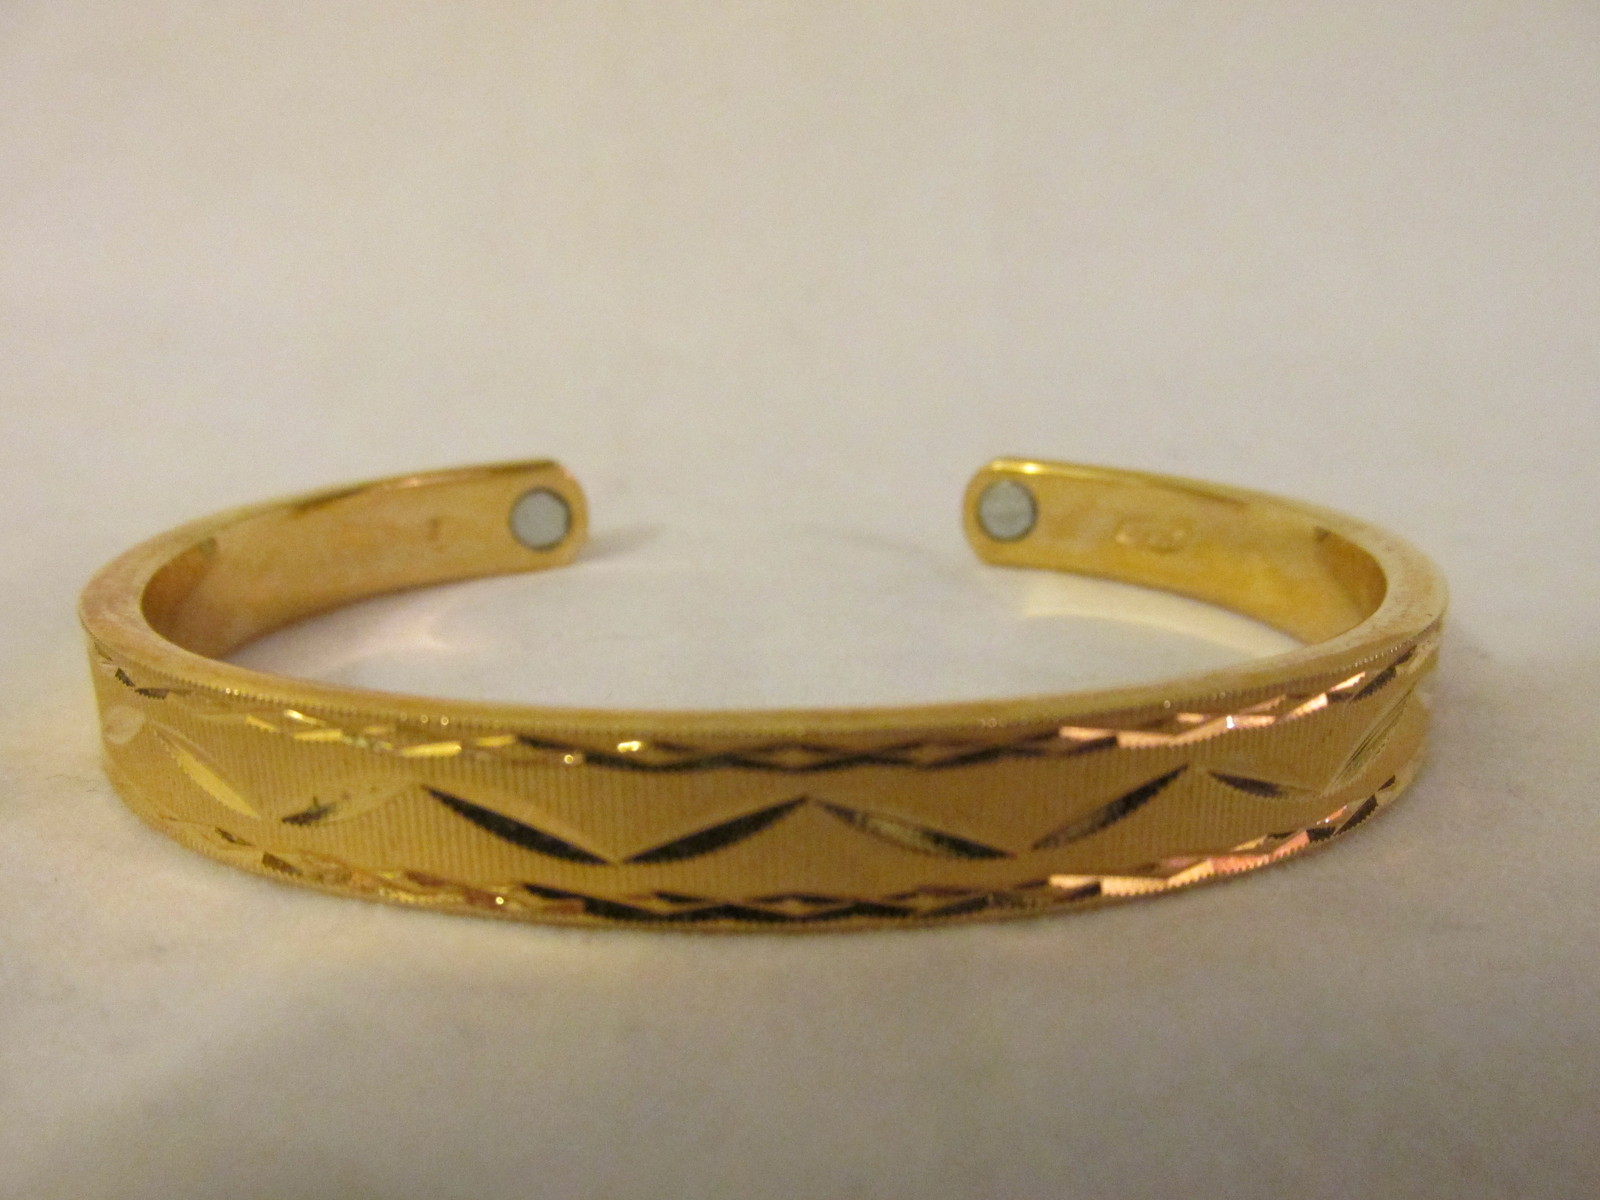 Vintage Avon Cuff Bracelets, Silver and Gold Toned (Magnetic) - 1976 ...